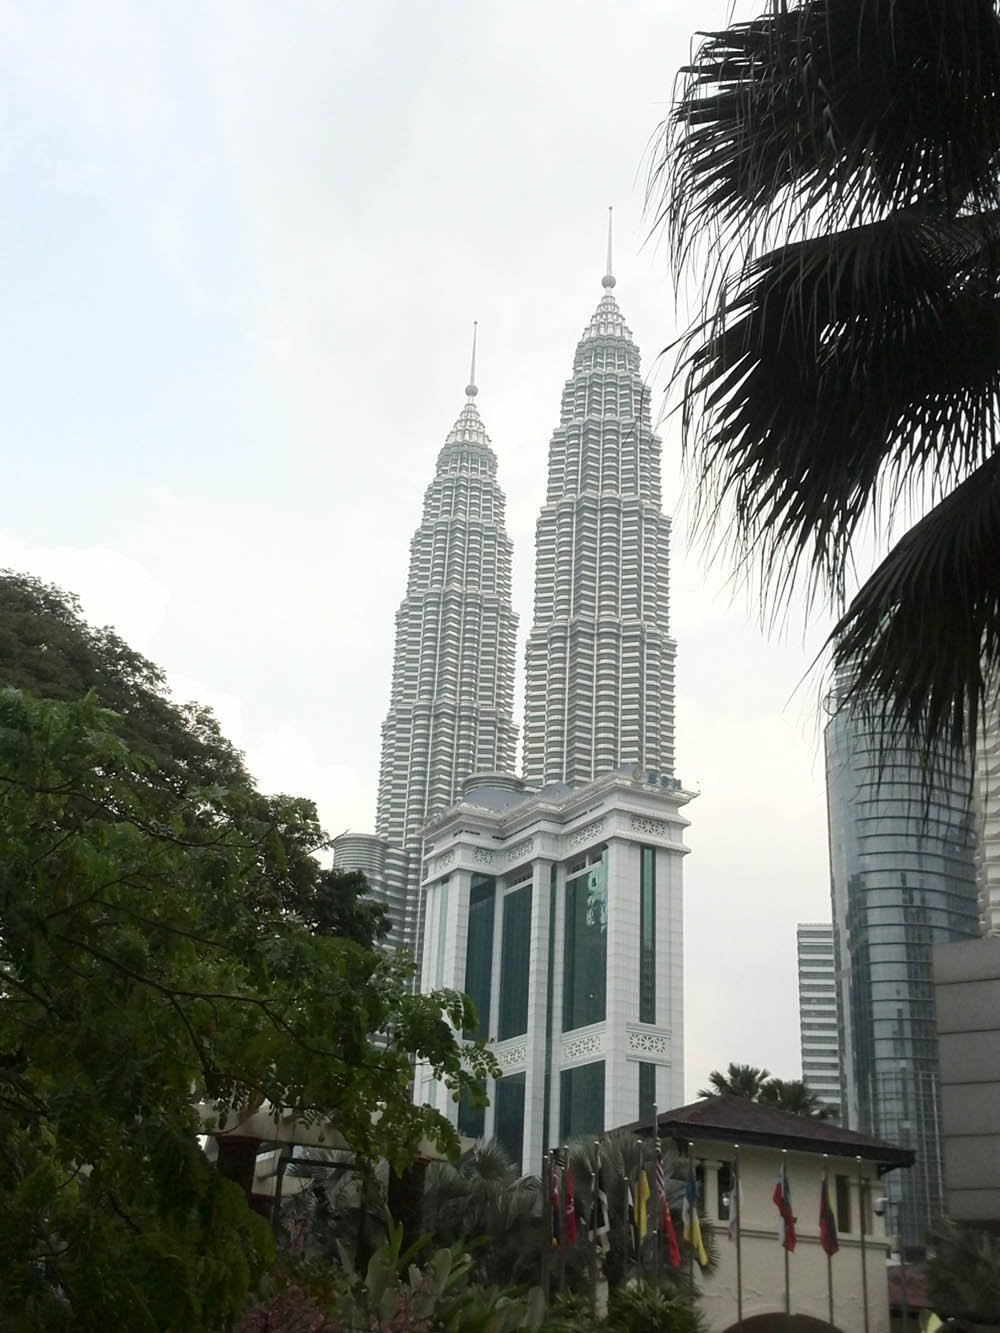 The tallest building in the world.